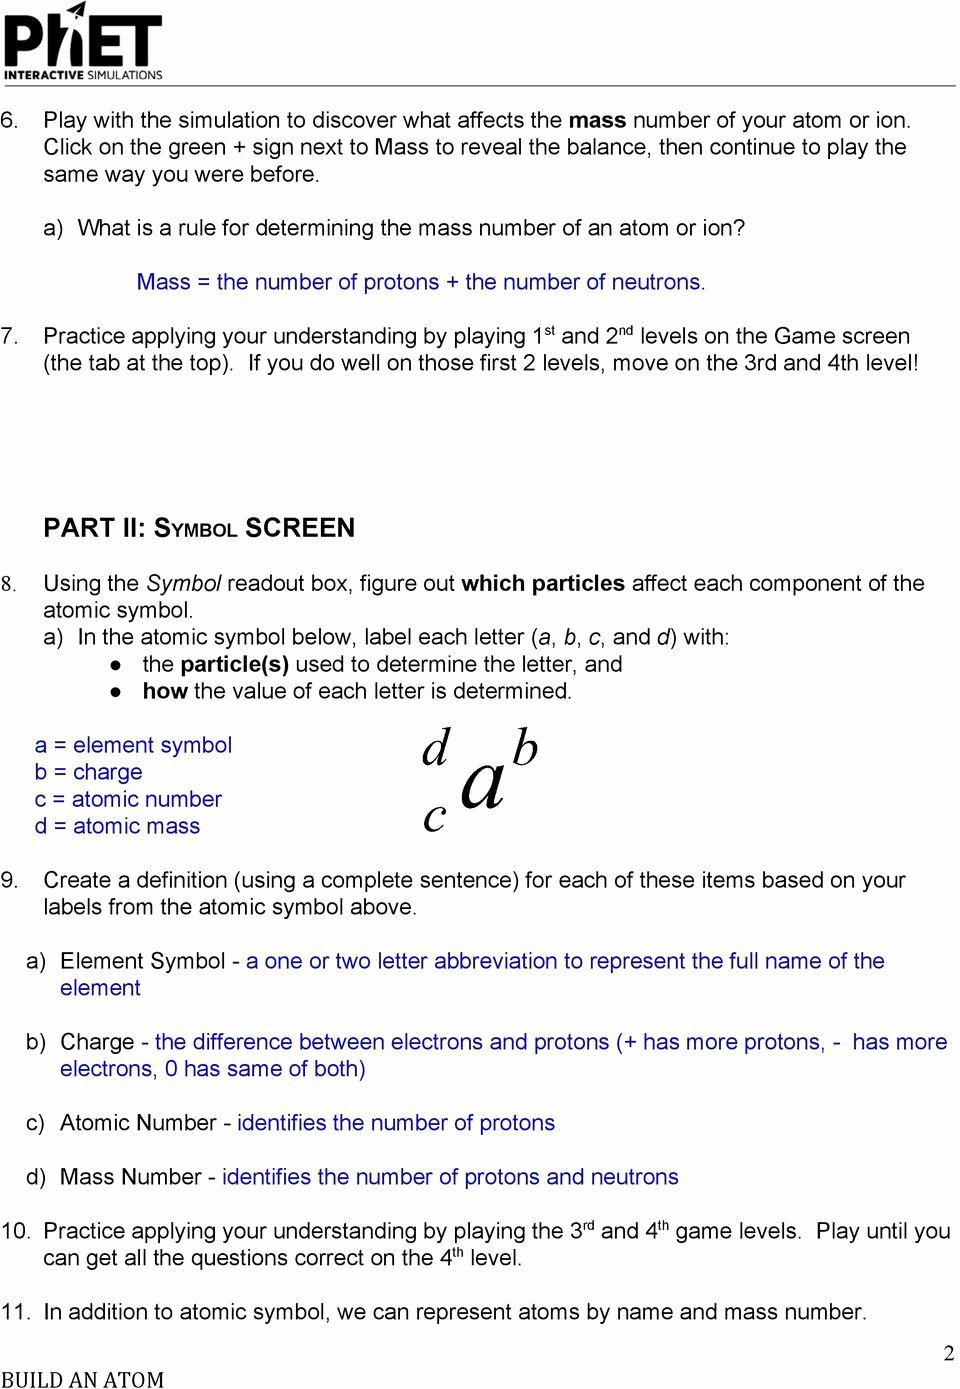 Build An atom Worksheet Answers Unique Chapter 3 Section 1 Basic Principles Worksheet Answers